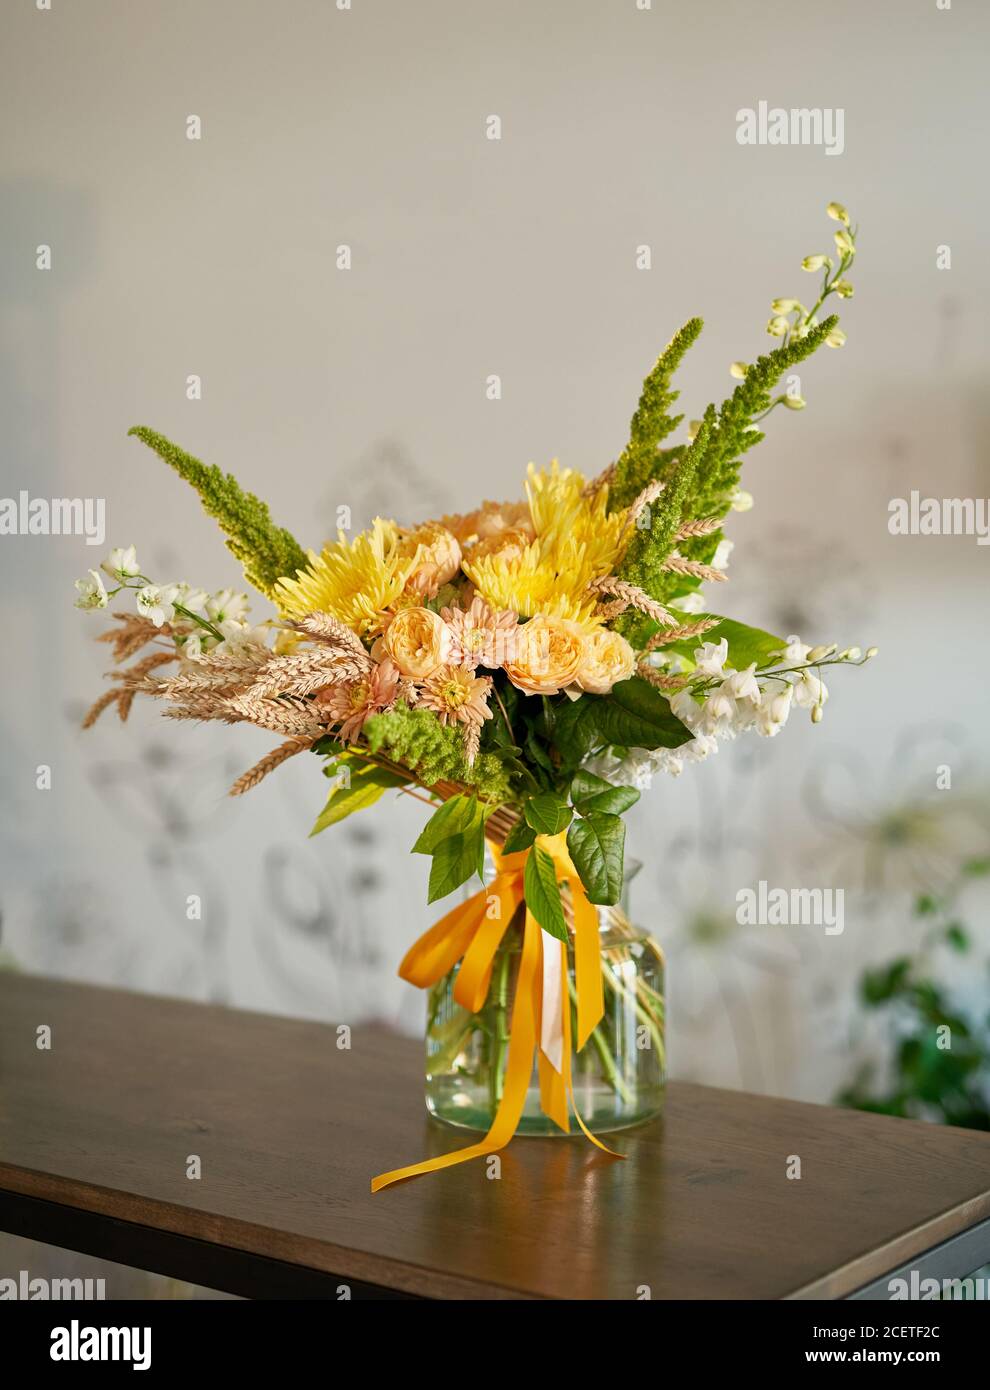 Beautiful blossoming flower bouquet of fresh chrysanthemums, roses, delphiniums, pigweeds and amaranths in yellow, beige and green colors in vase with Stock Photo